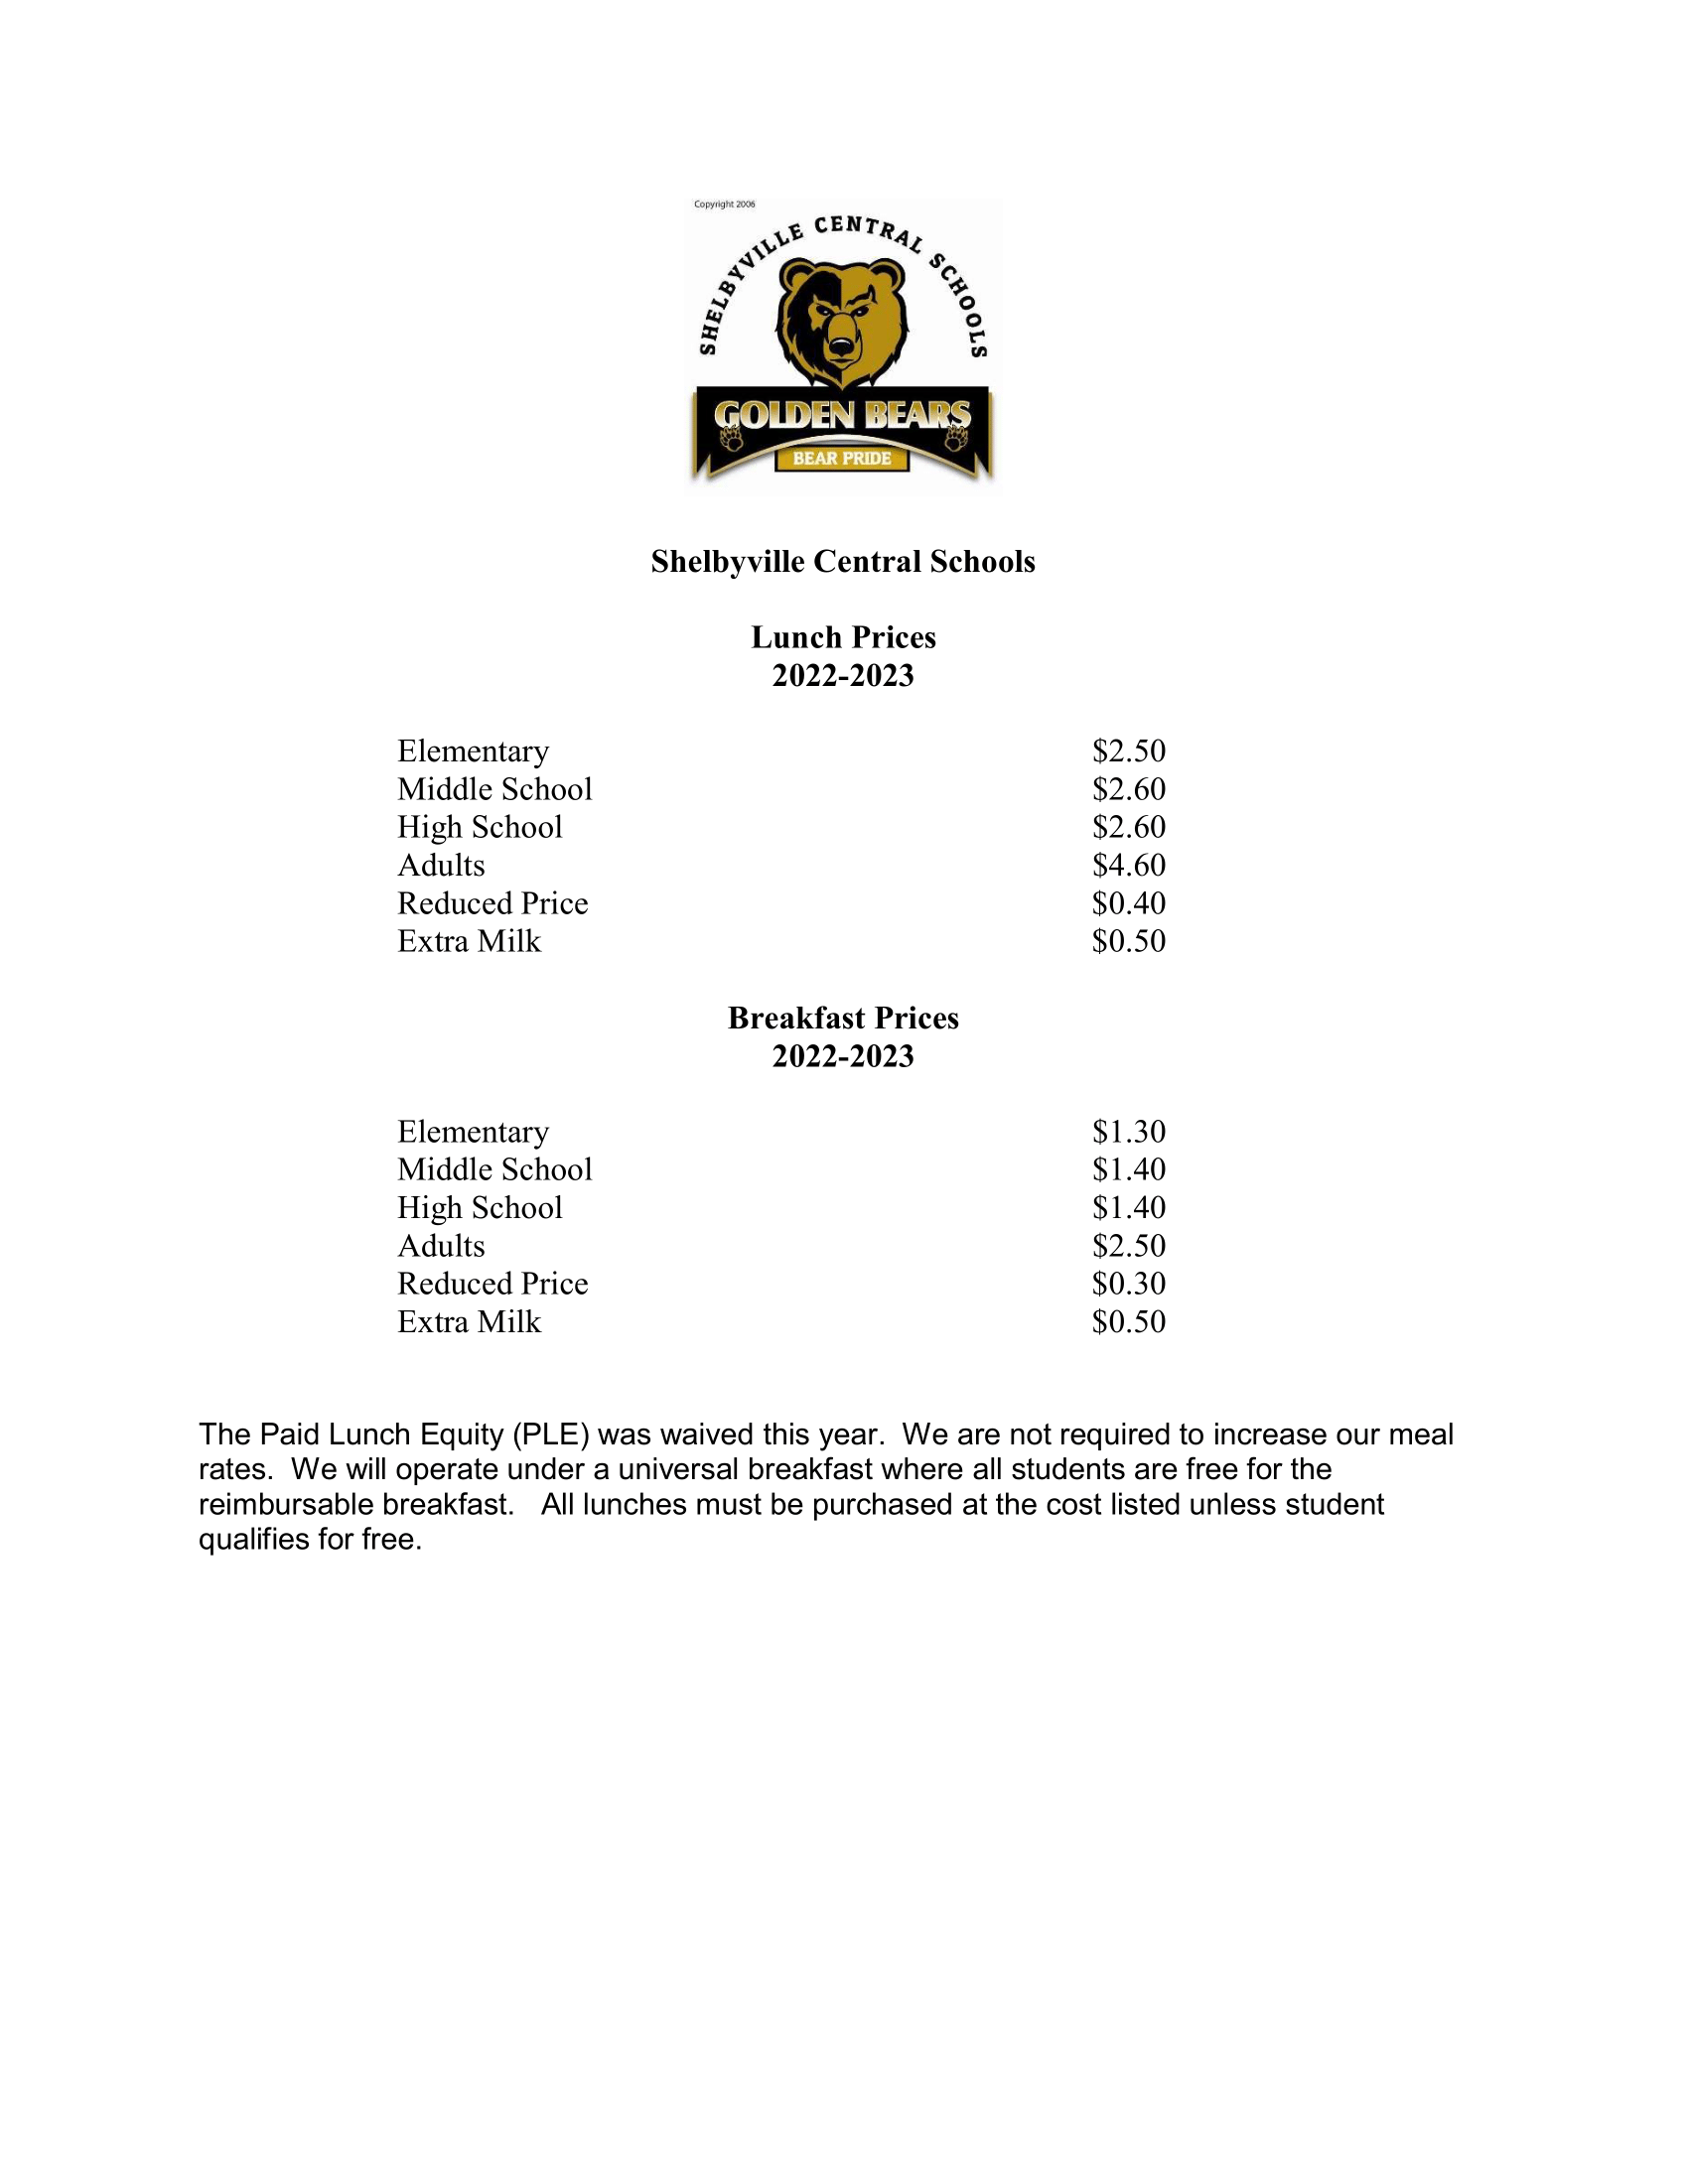 2022-2023 Meal Prices